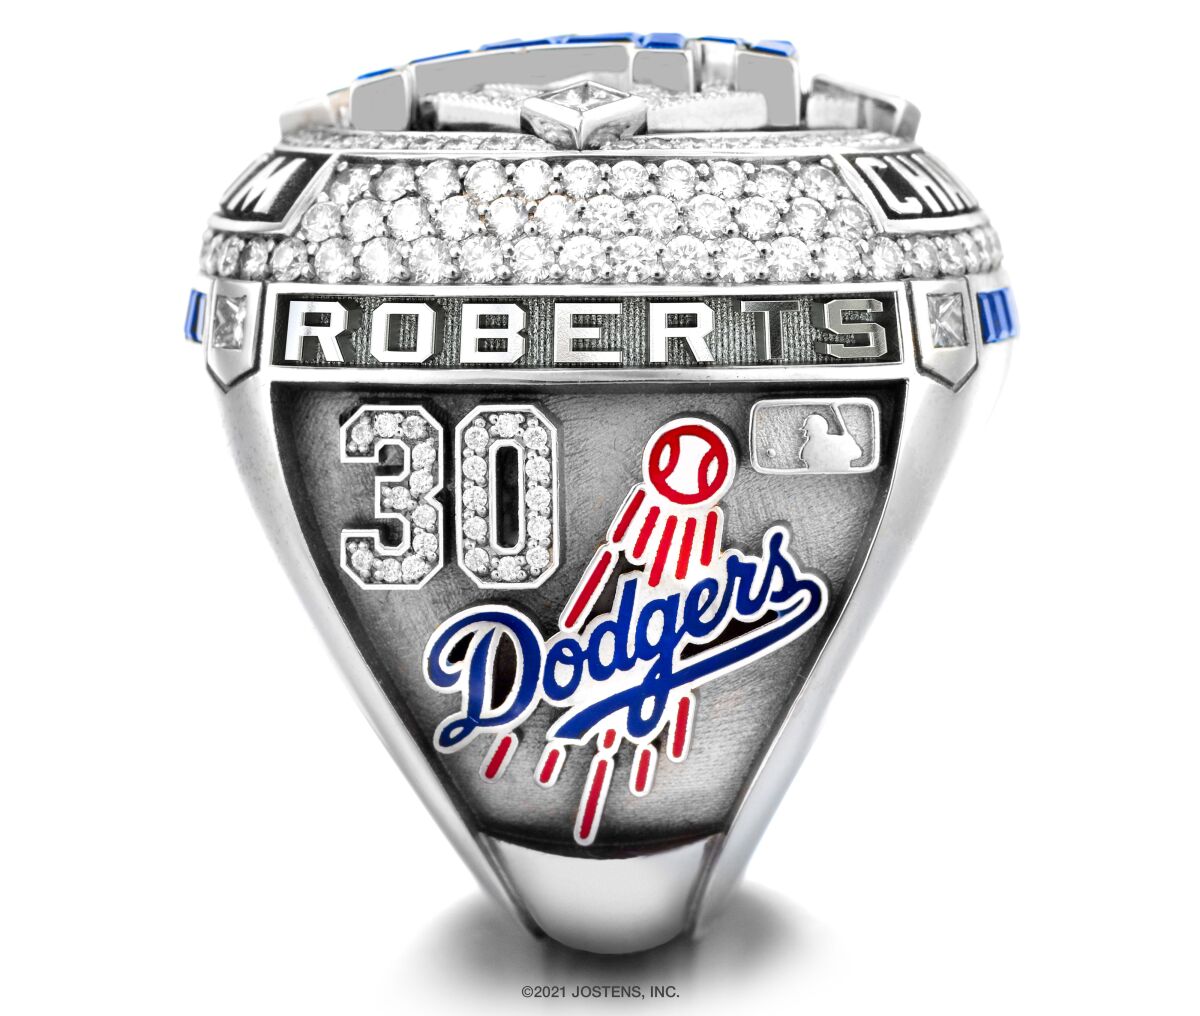 Dodgers 2020 World Series ring.